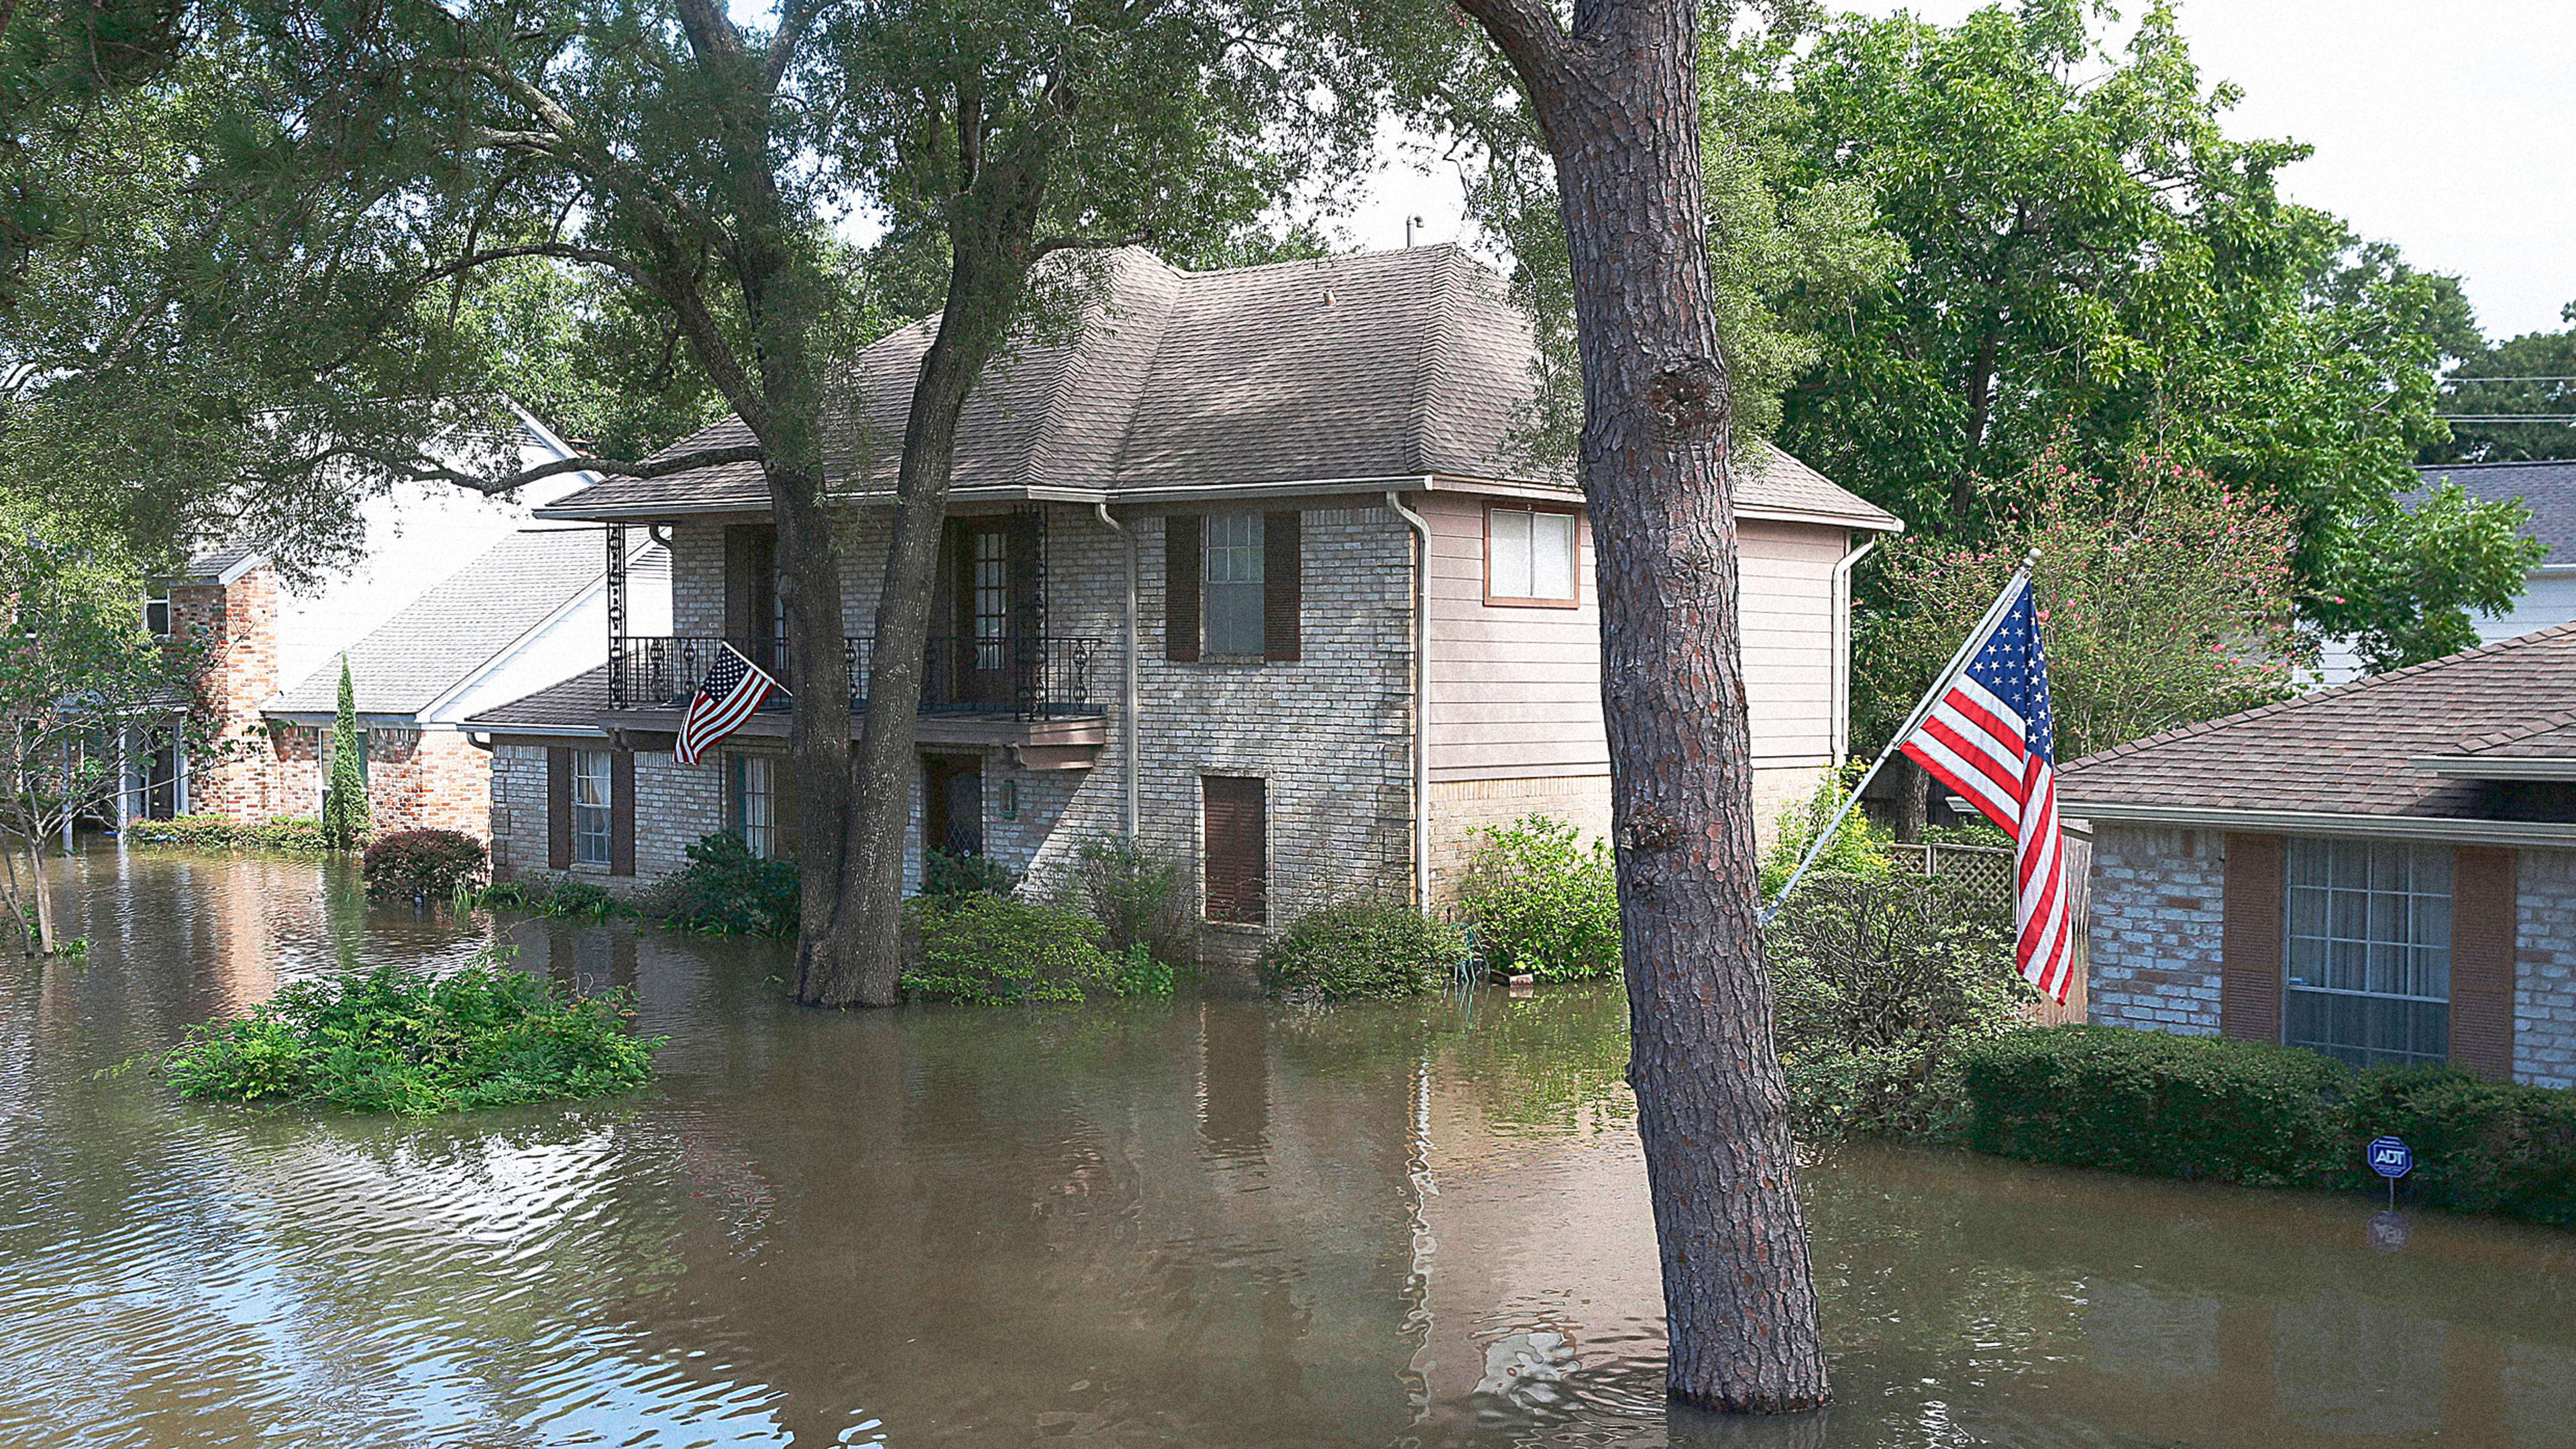 Is your house going to flood because of climate change? These maps will tell you